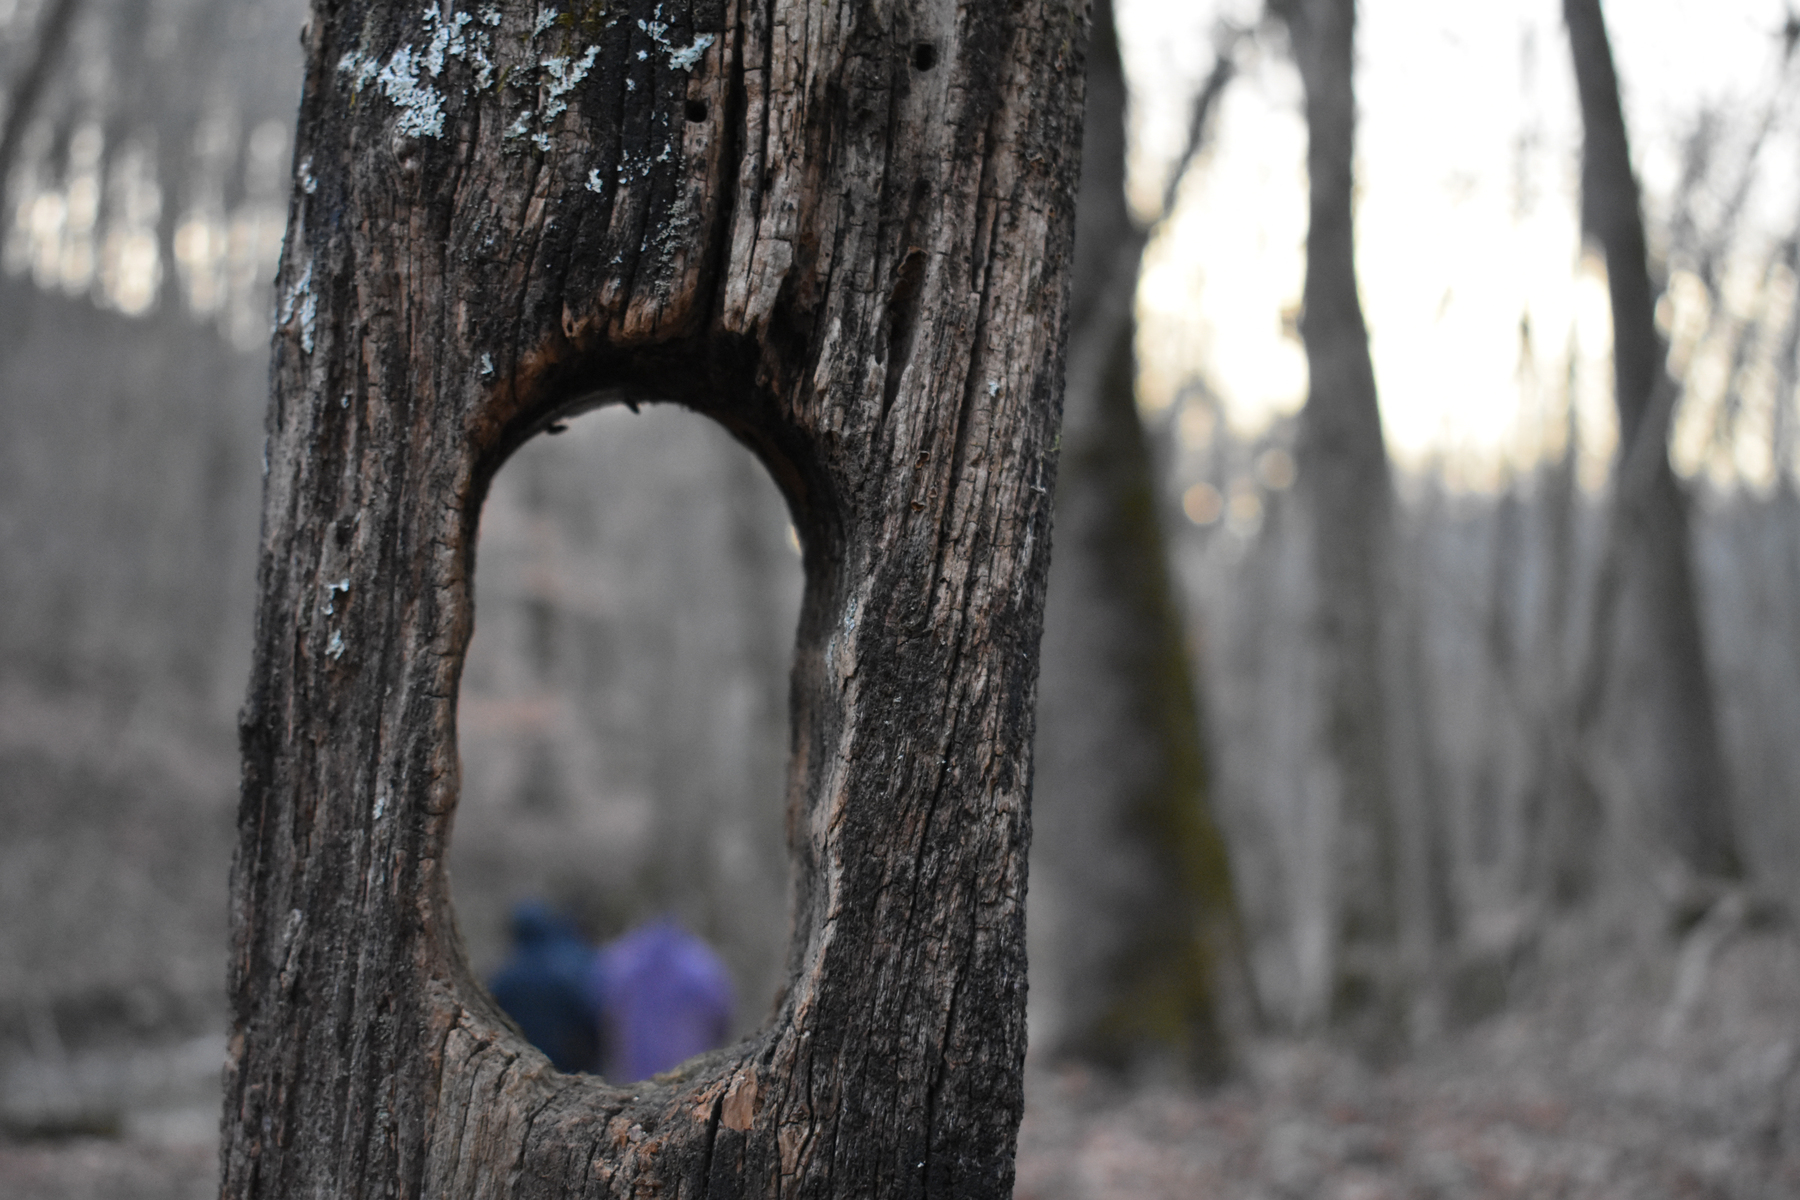 People through a tree hole